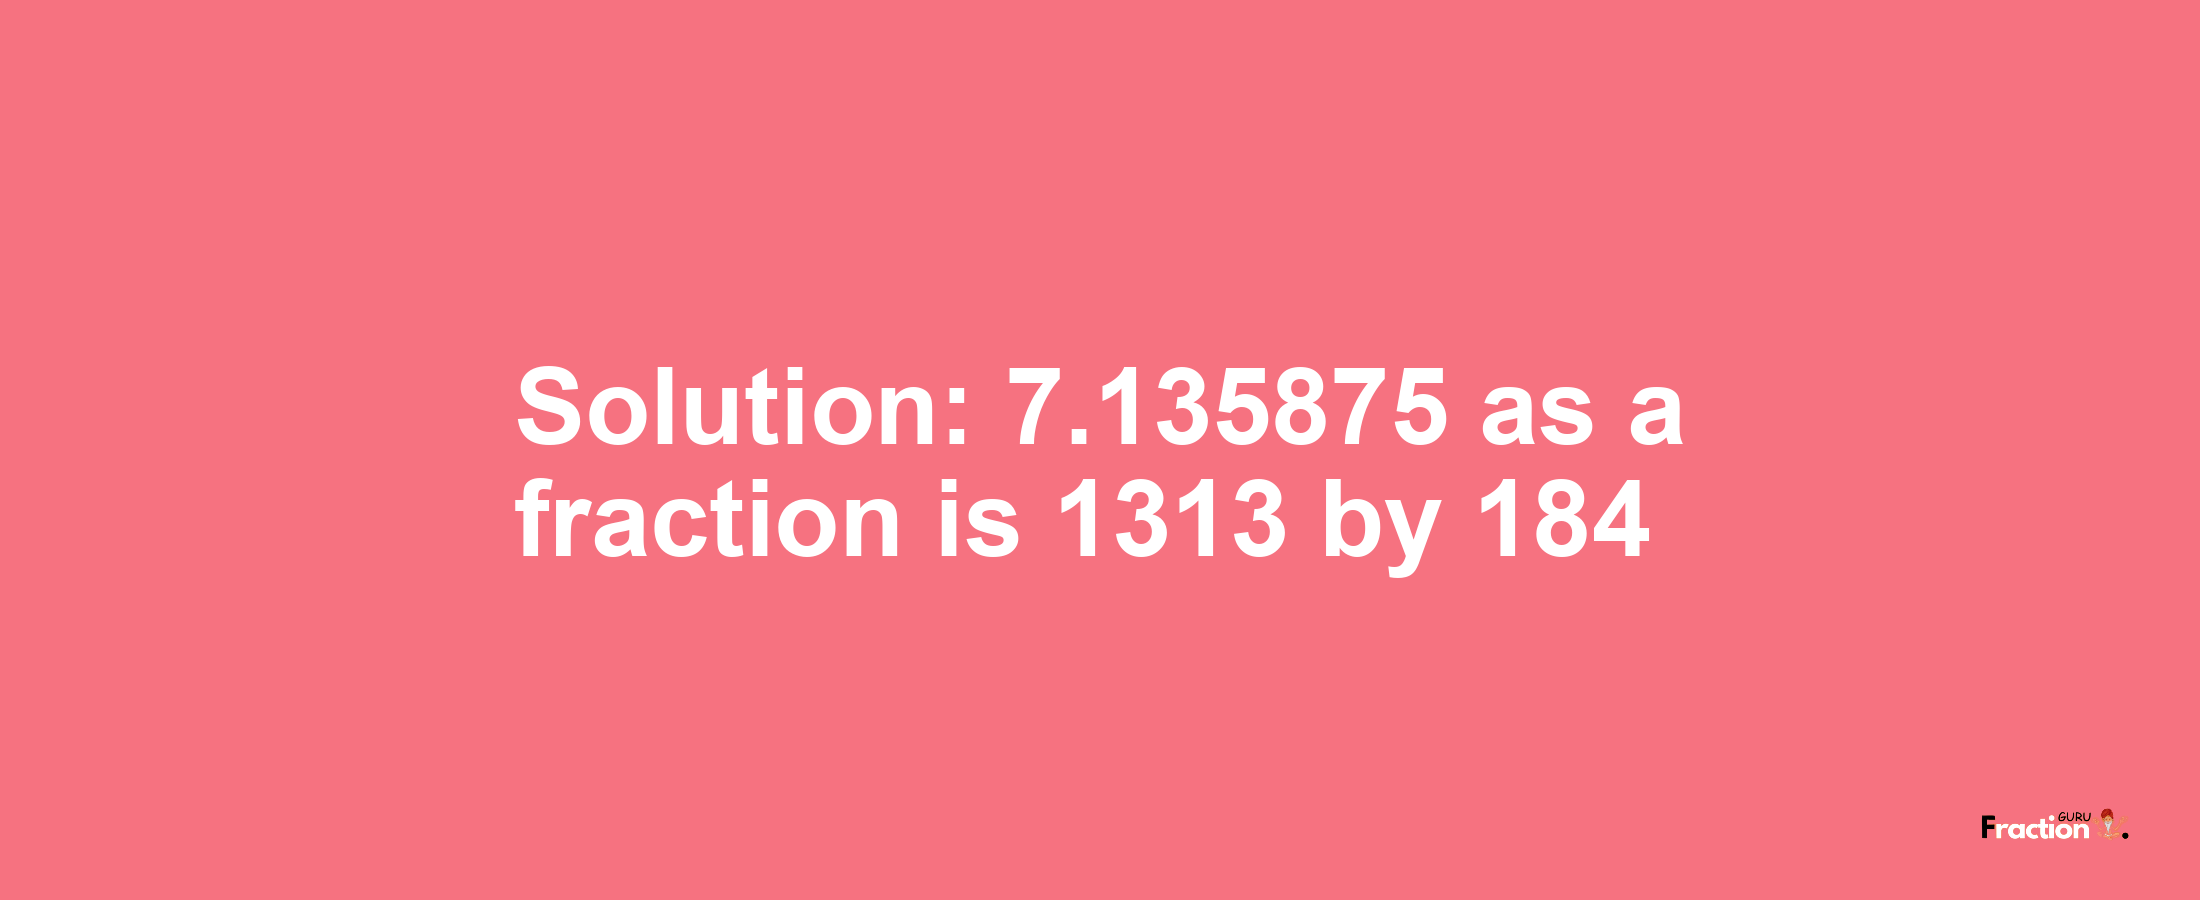 Solution:7.135875 as a fraction is 1313/184